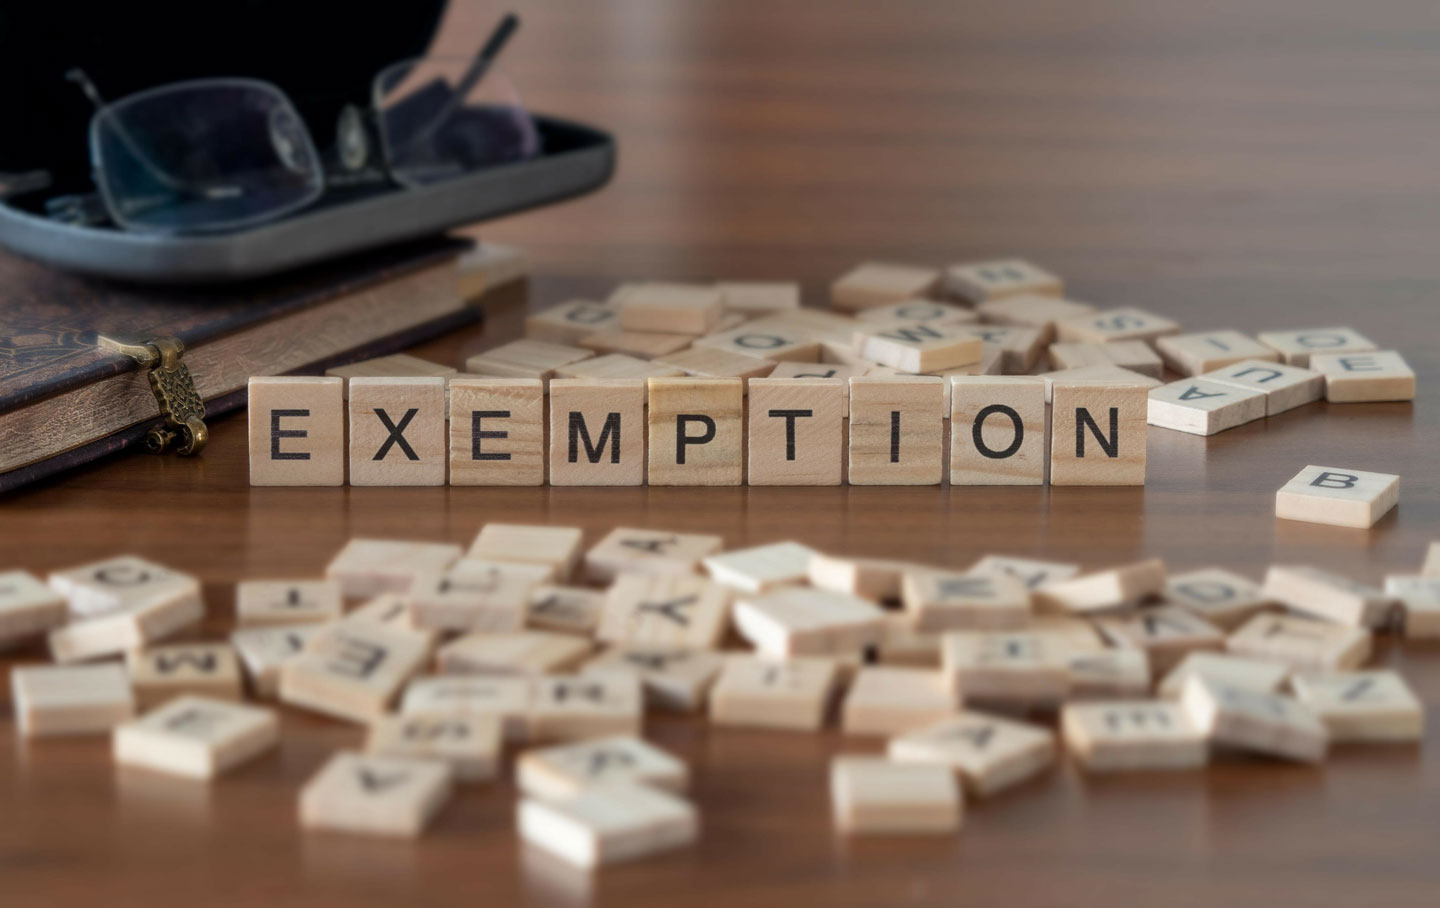 scrabble letters spelling out the word exemptions